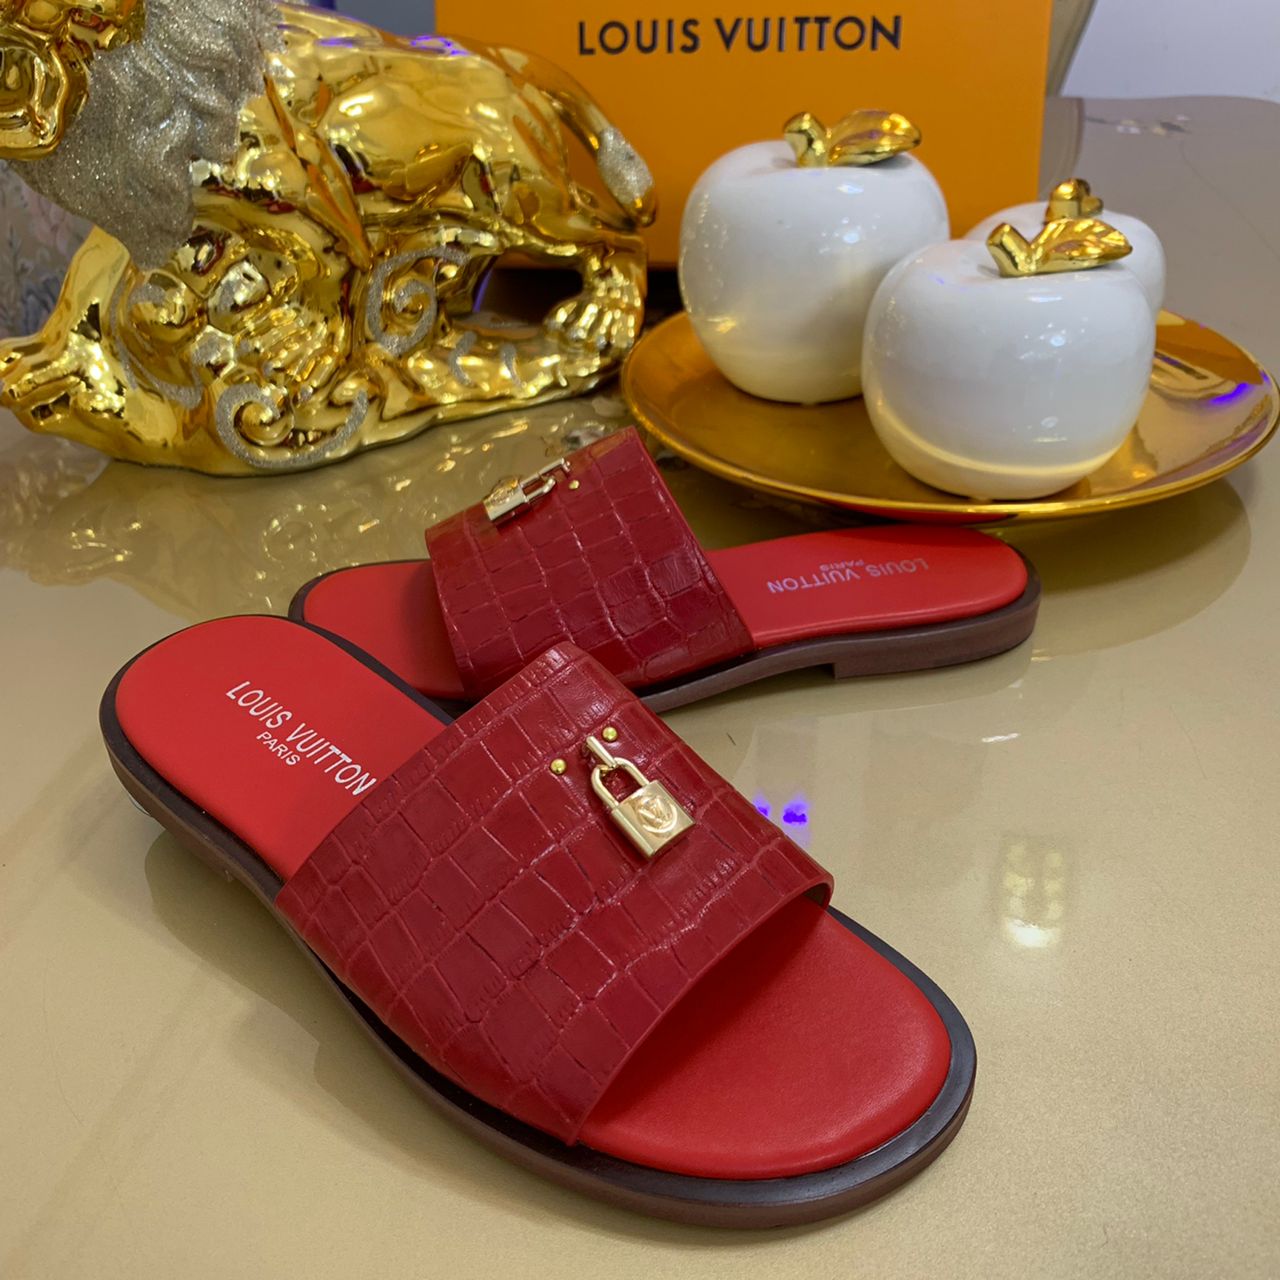 LV PALM SLIPPER  CartRollers ﻿Online Marketplace Shopping Store